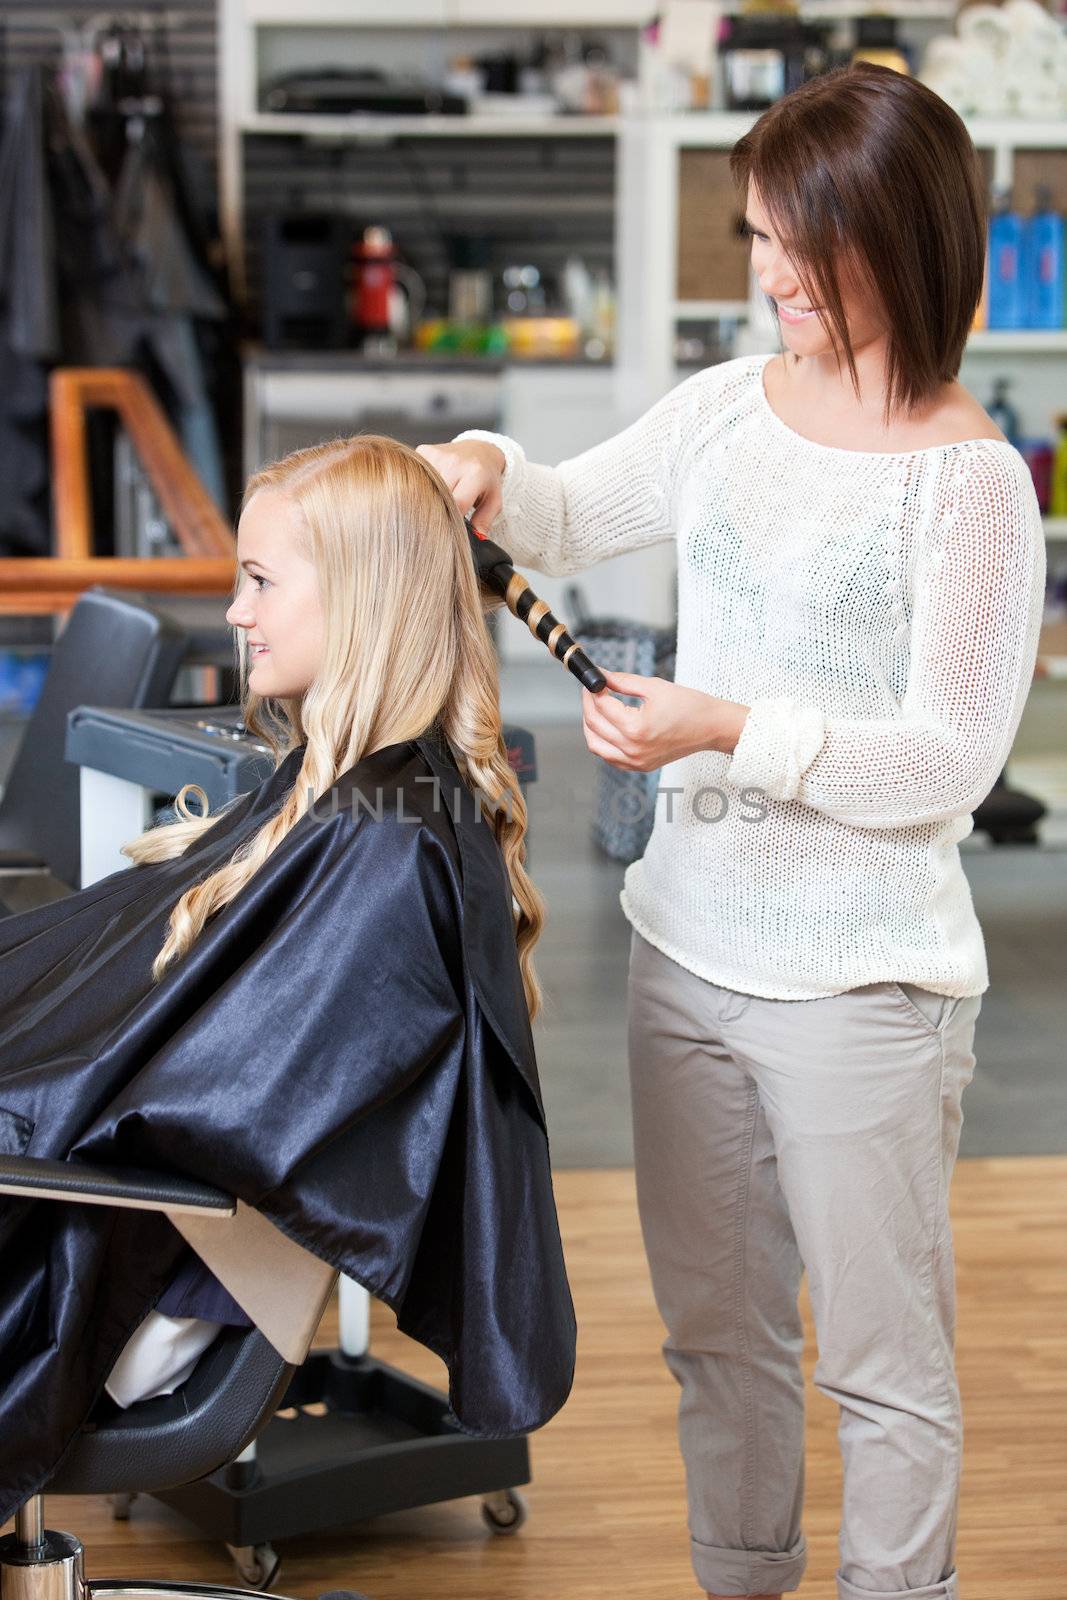 Stylist curling hair of a young blond customer